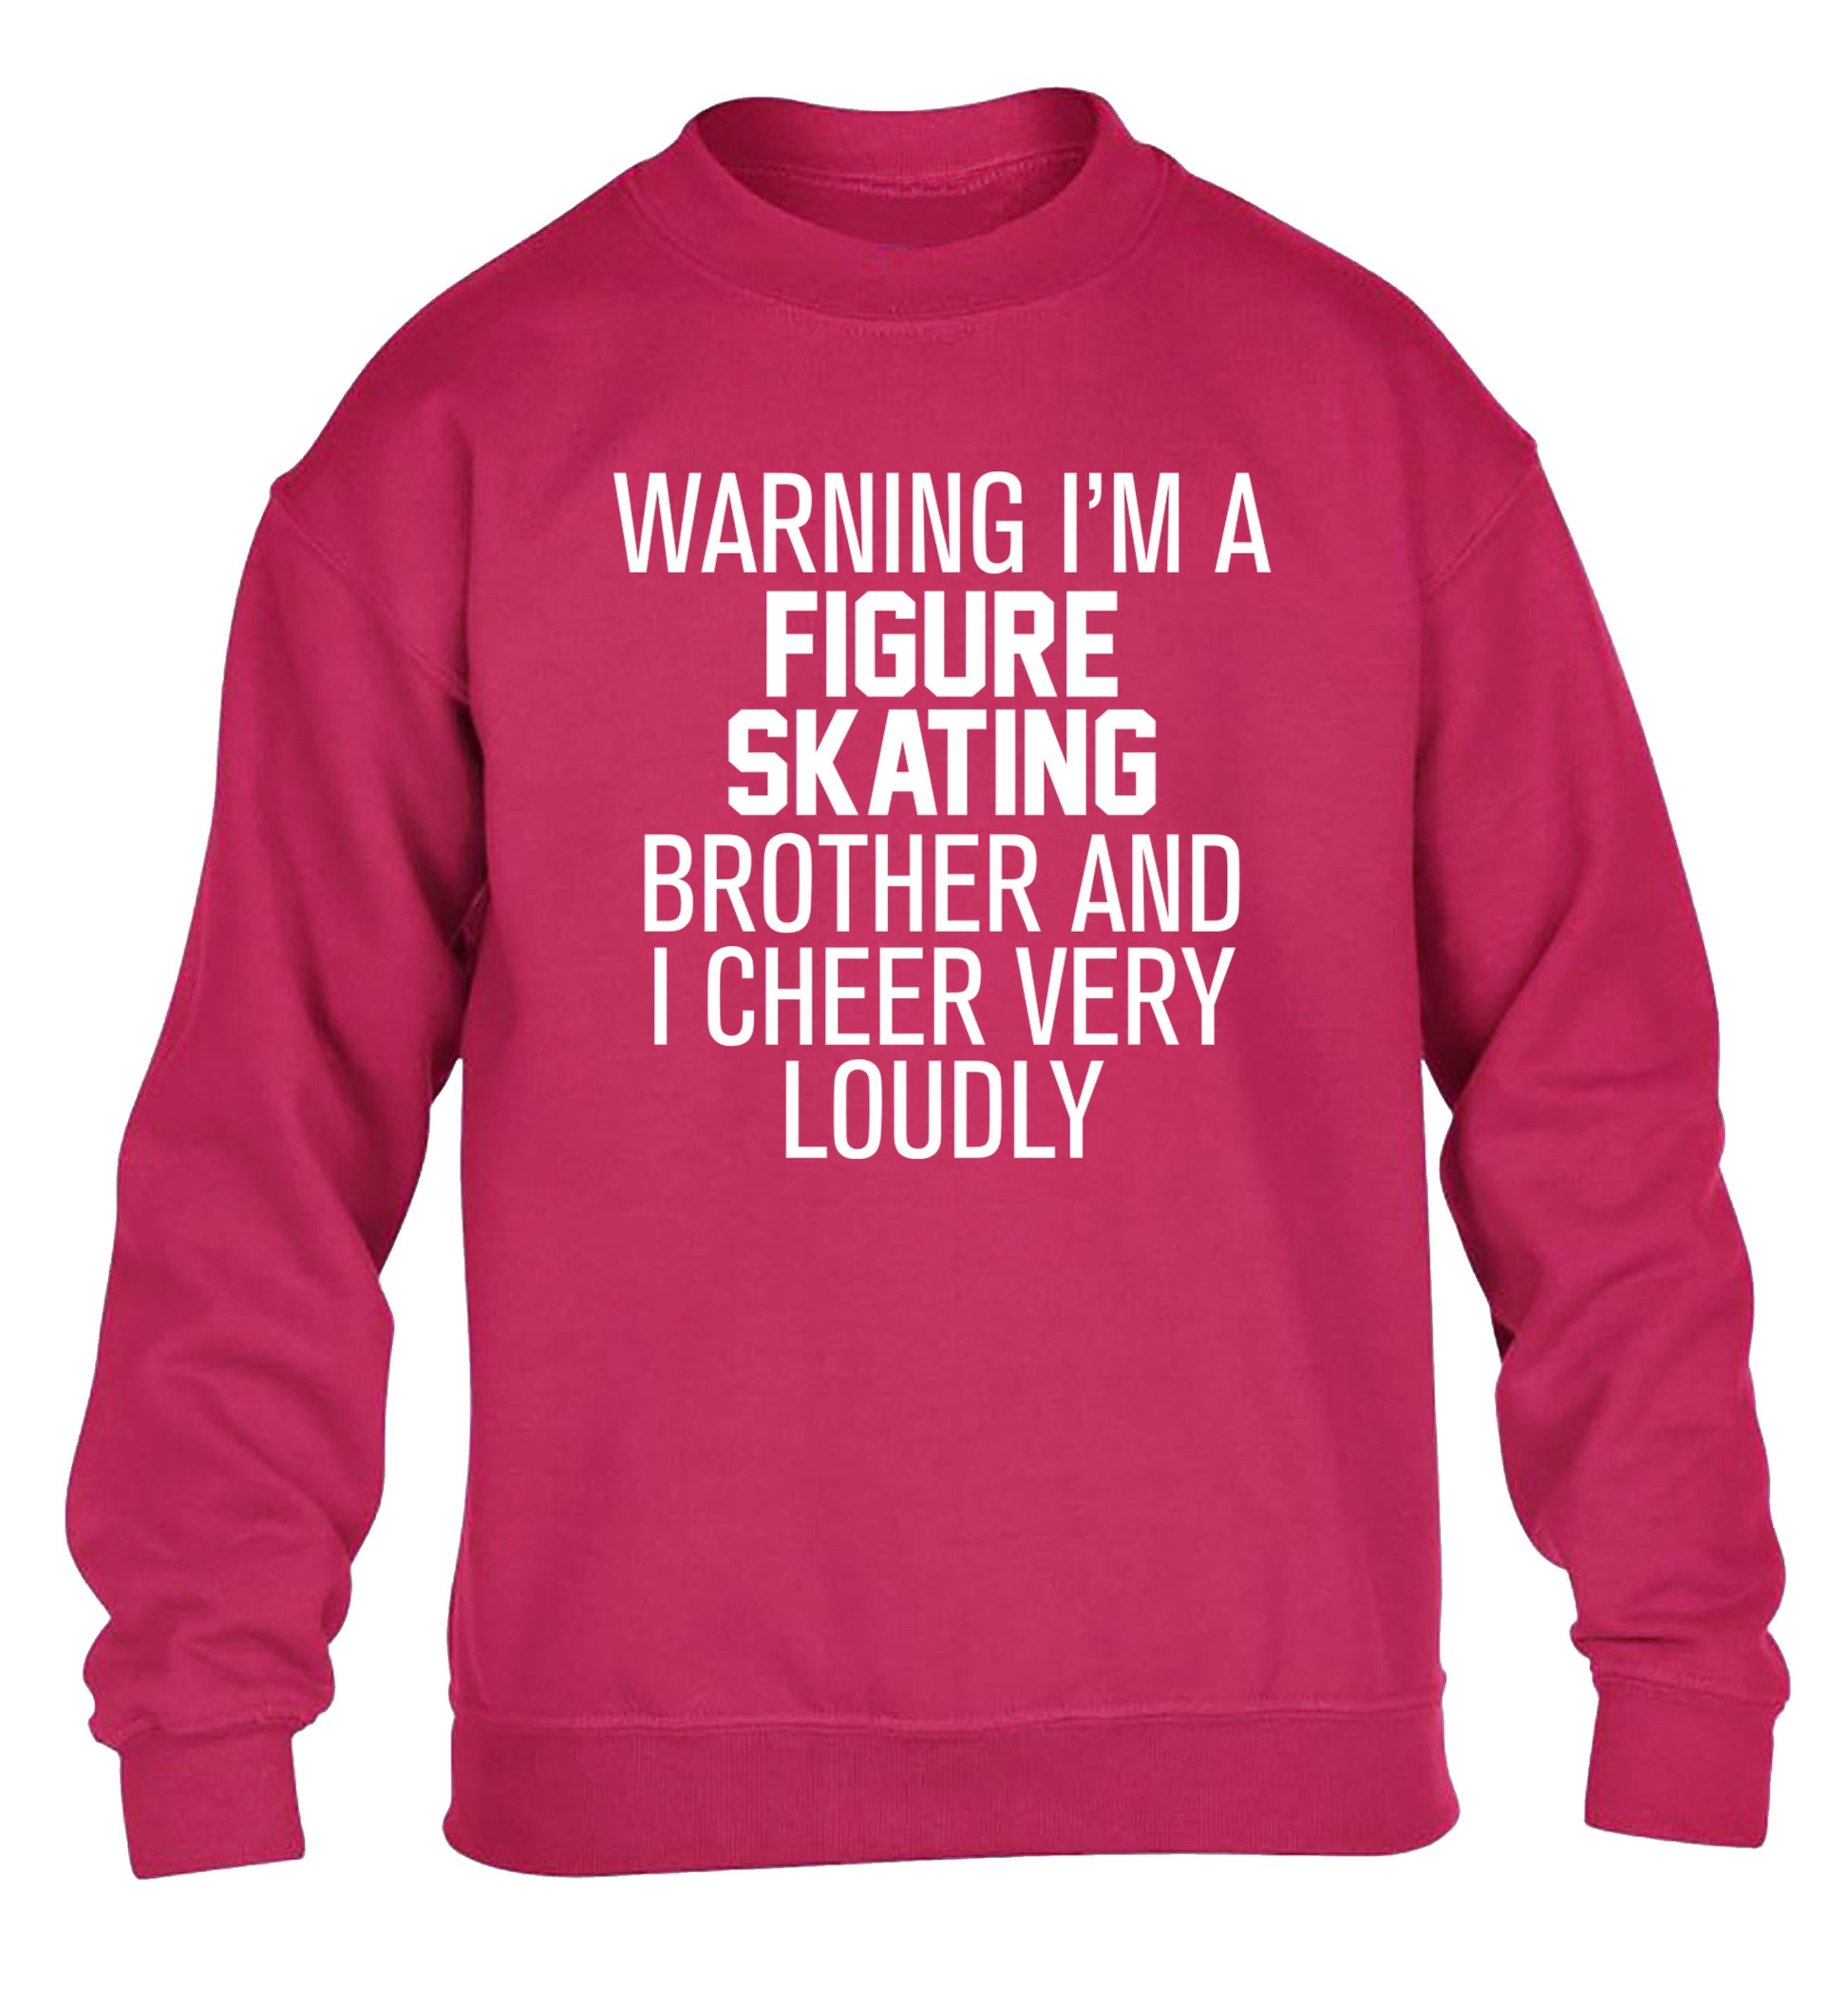 Warning I'm a figure skating brother and I cheer very loudly children's pink sweater 12-14 Years